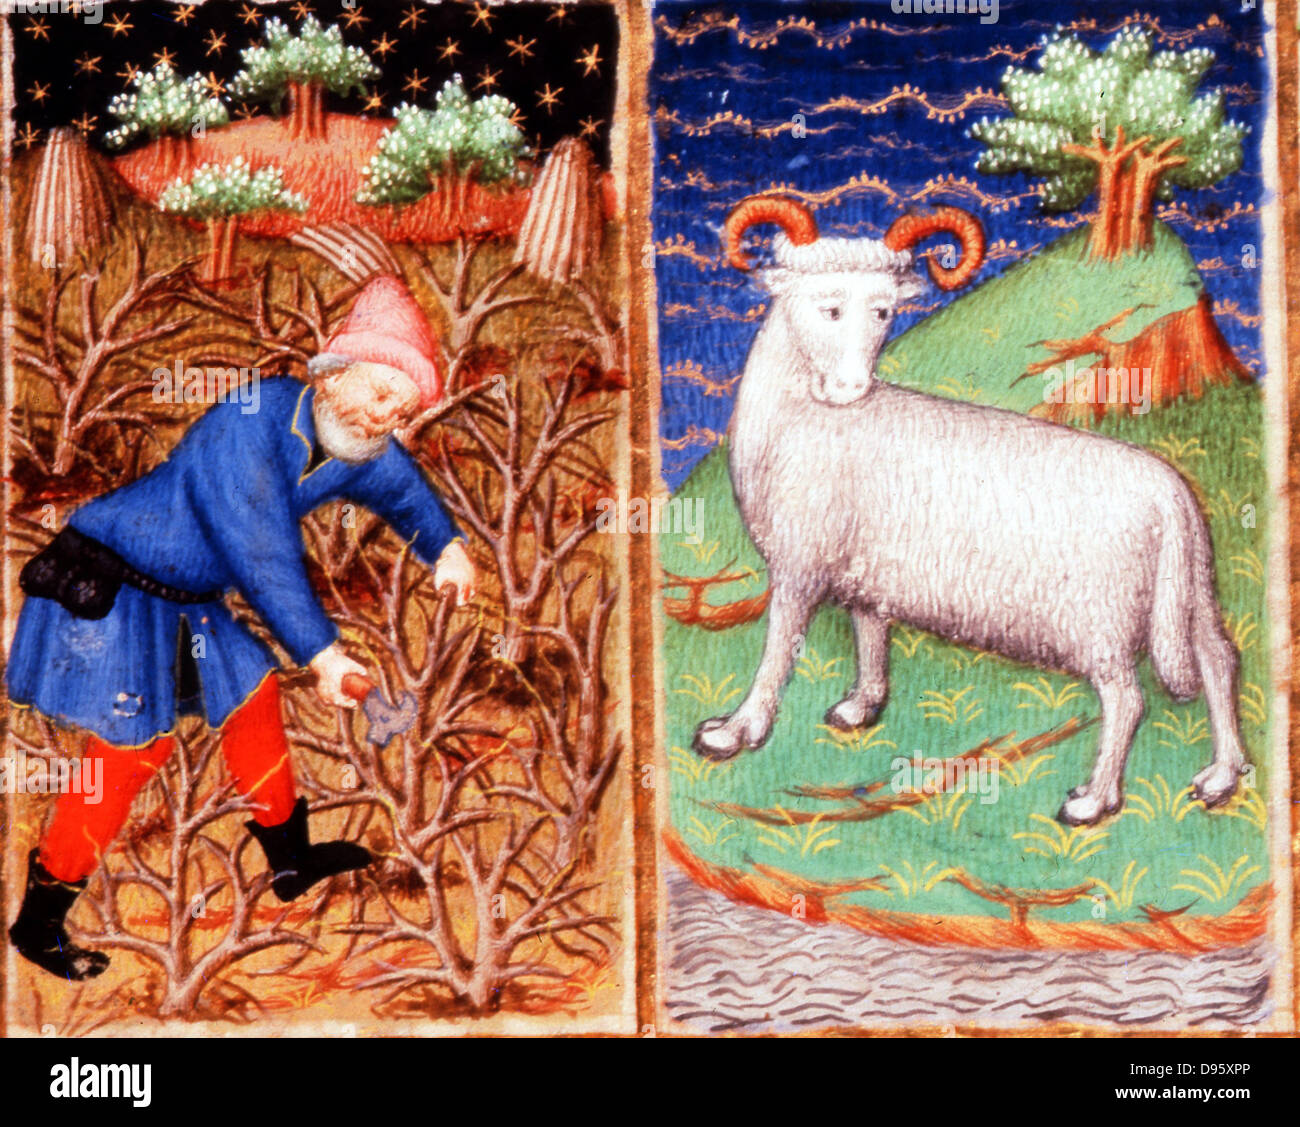 March. Astrological sign of Aries. Pruning. From the 'Bedford Hours', French 15th century illuminated manuscript.  British Library, London. (Detail) Stock Photo